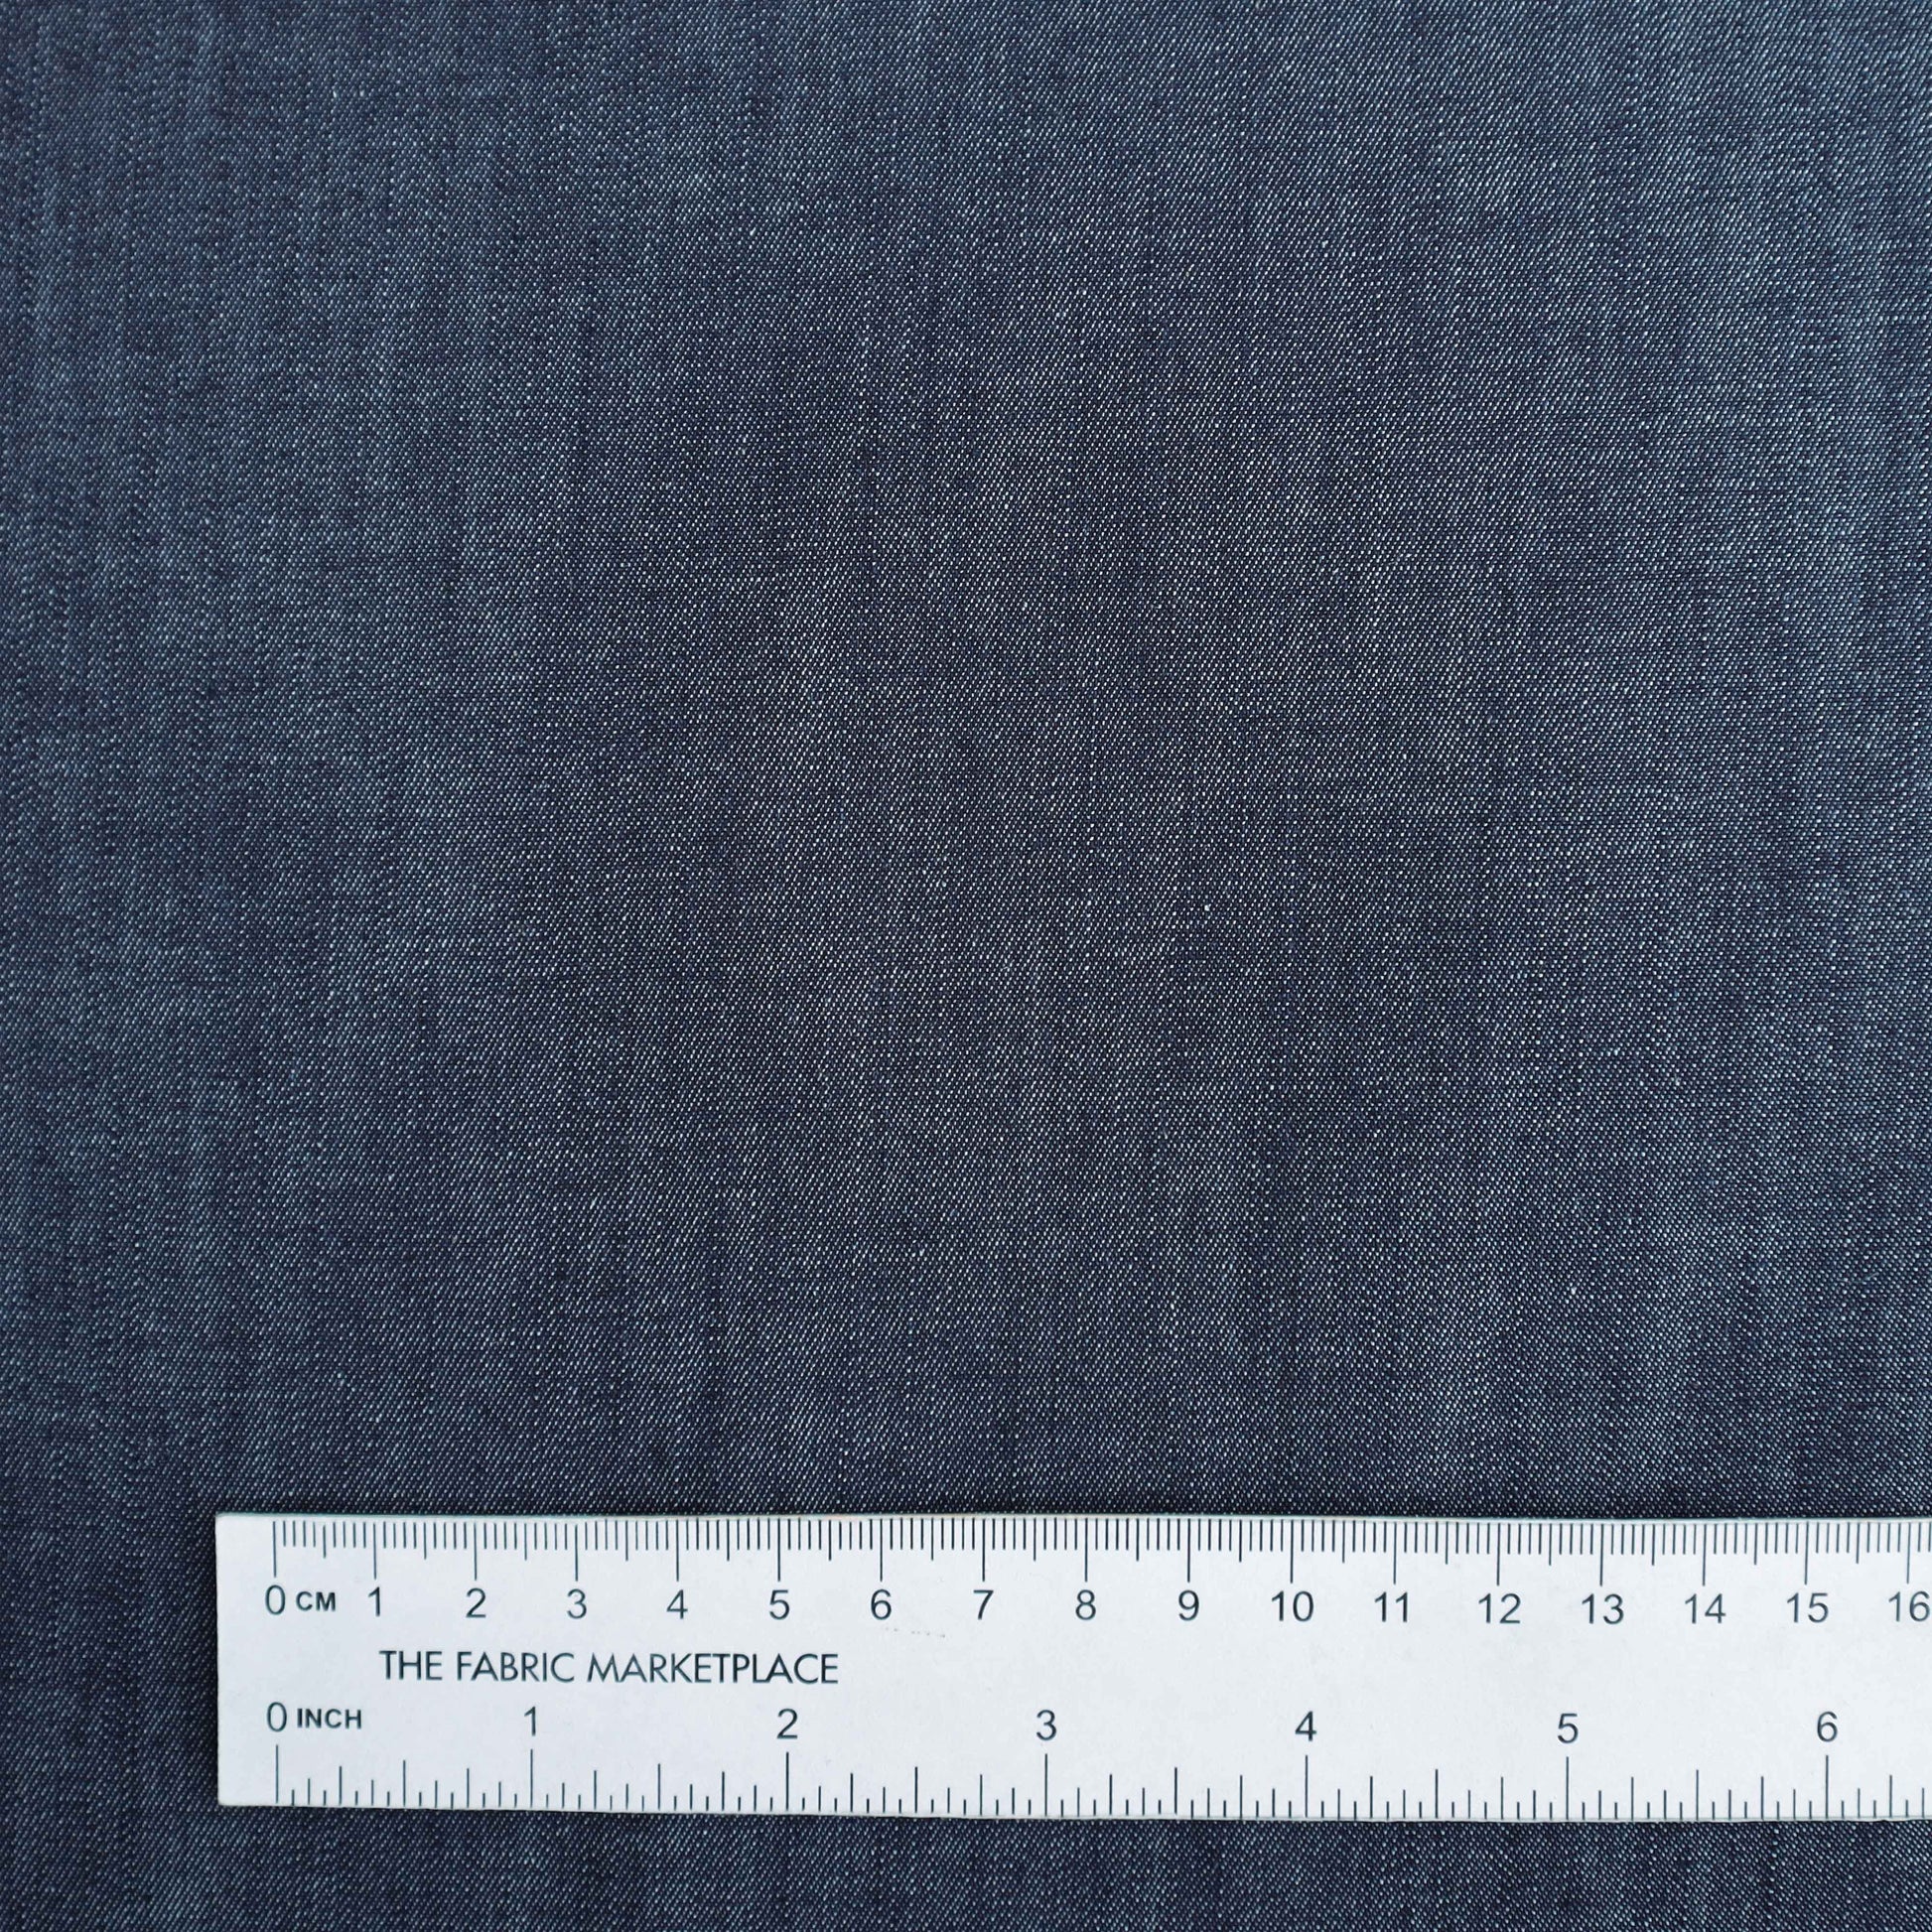 A mid-weight cotton stretch denim fabric. It does not snag or tear easily while still having a stretch to it